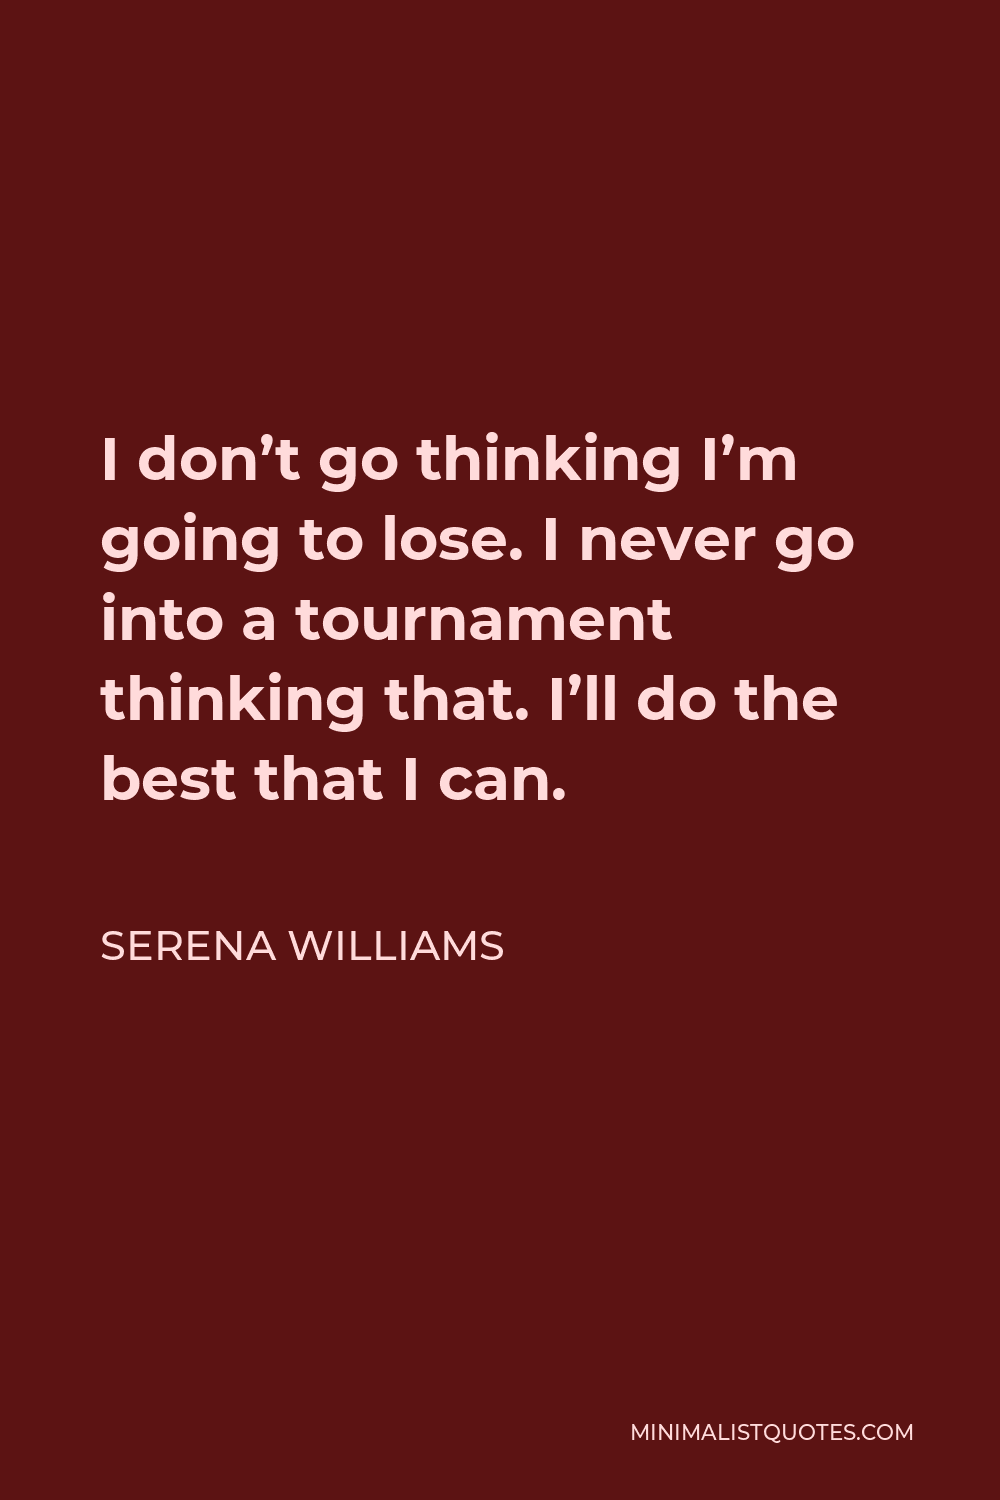 Serena Williams Quote - I don’t go thinking I’m going to lose. I never go into a tournament thinking that. I’ll do the best that I can.